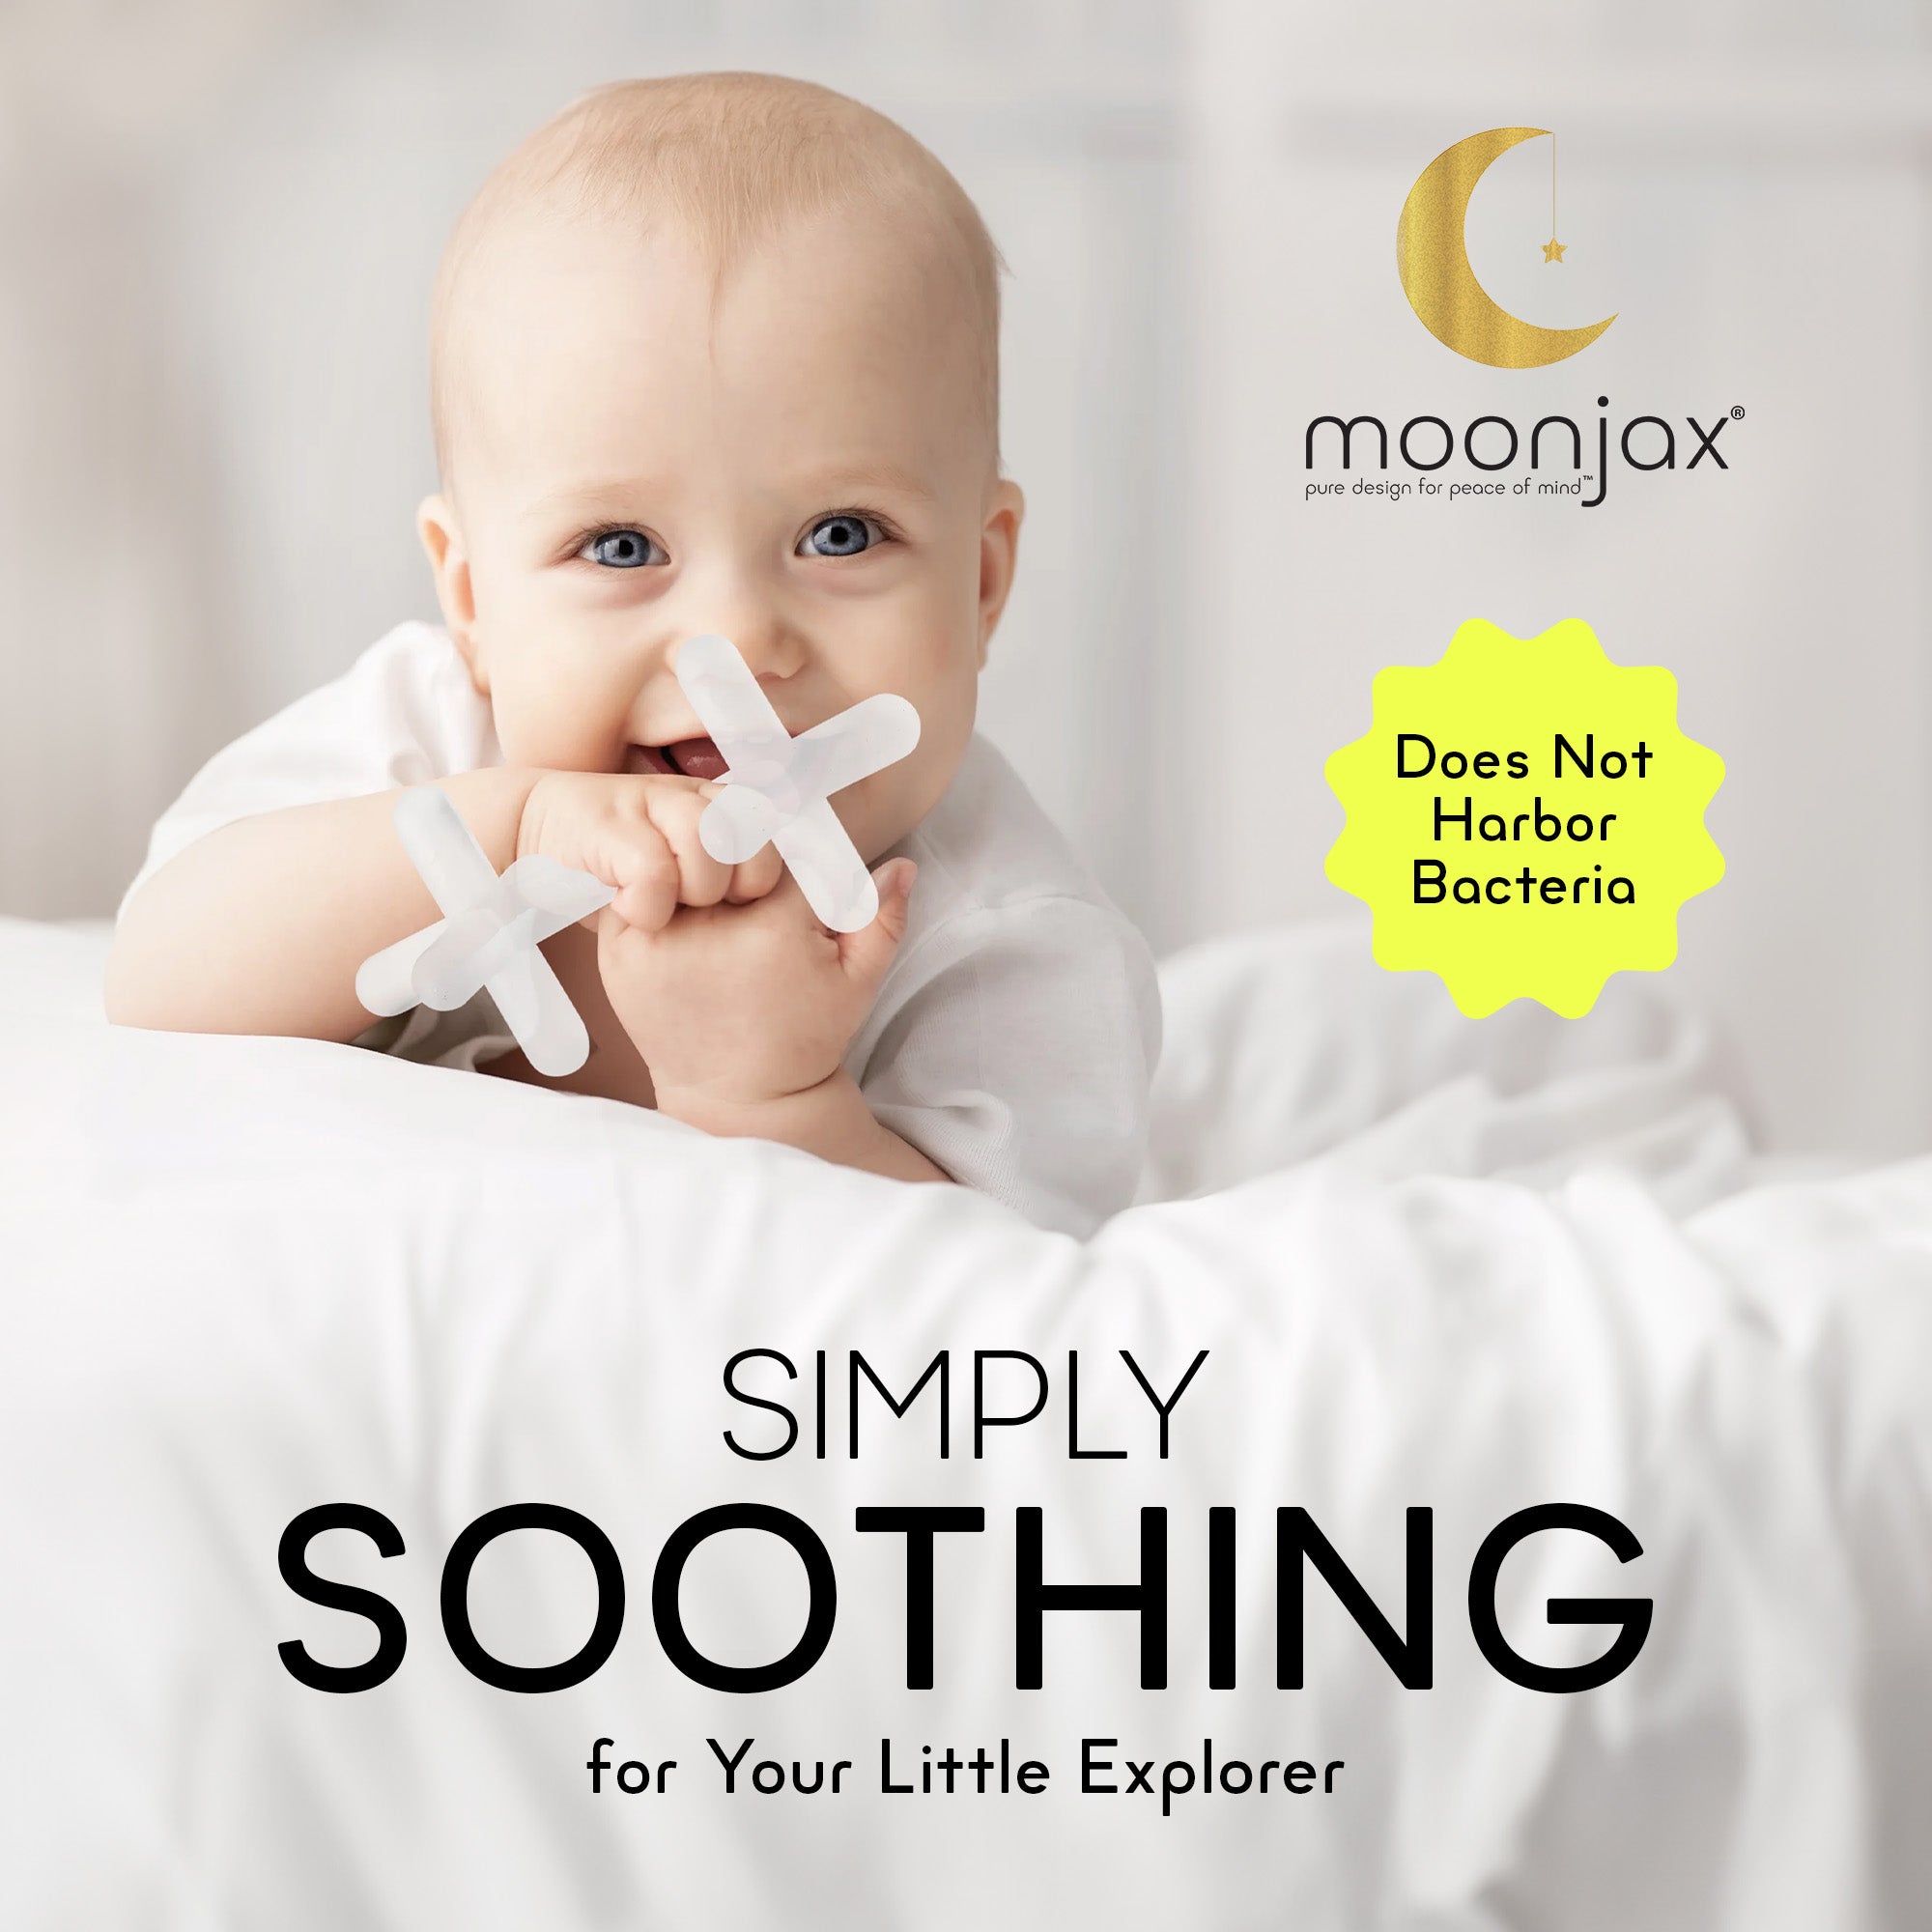 The best baby teether: Moonjax Baby Teether Is The Ultimate Teething Solution